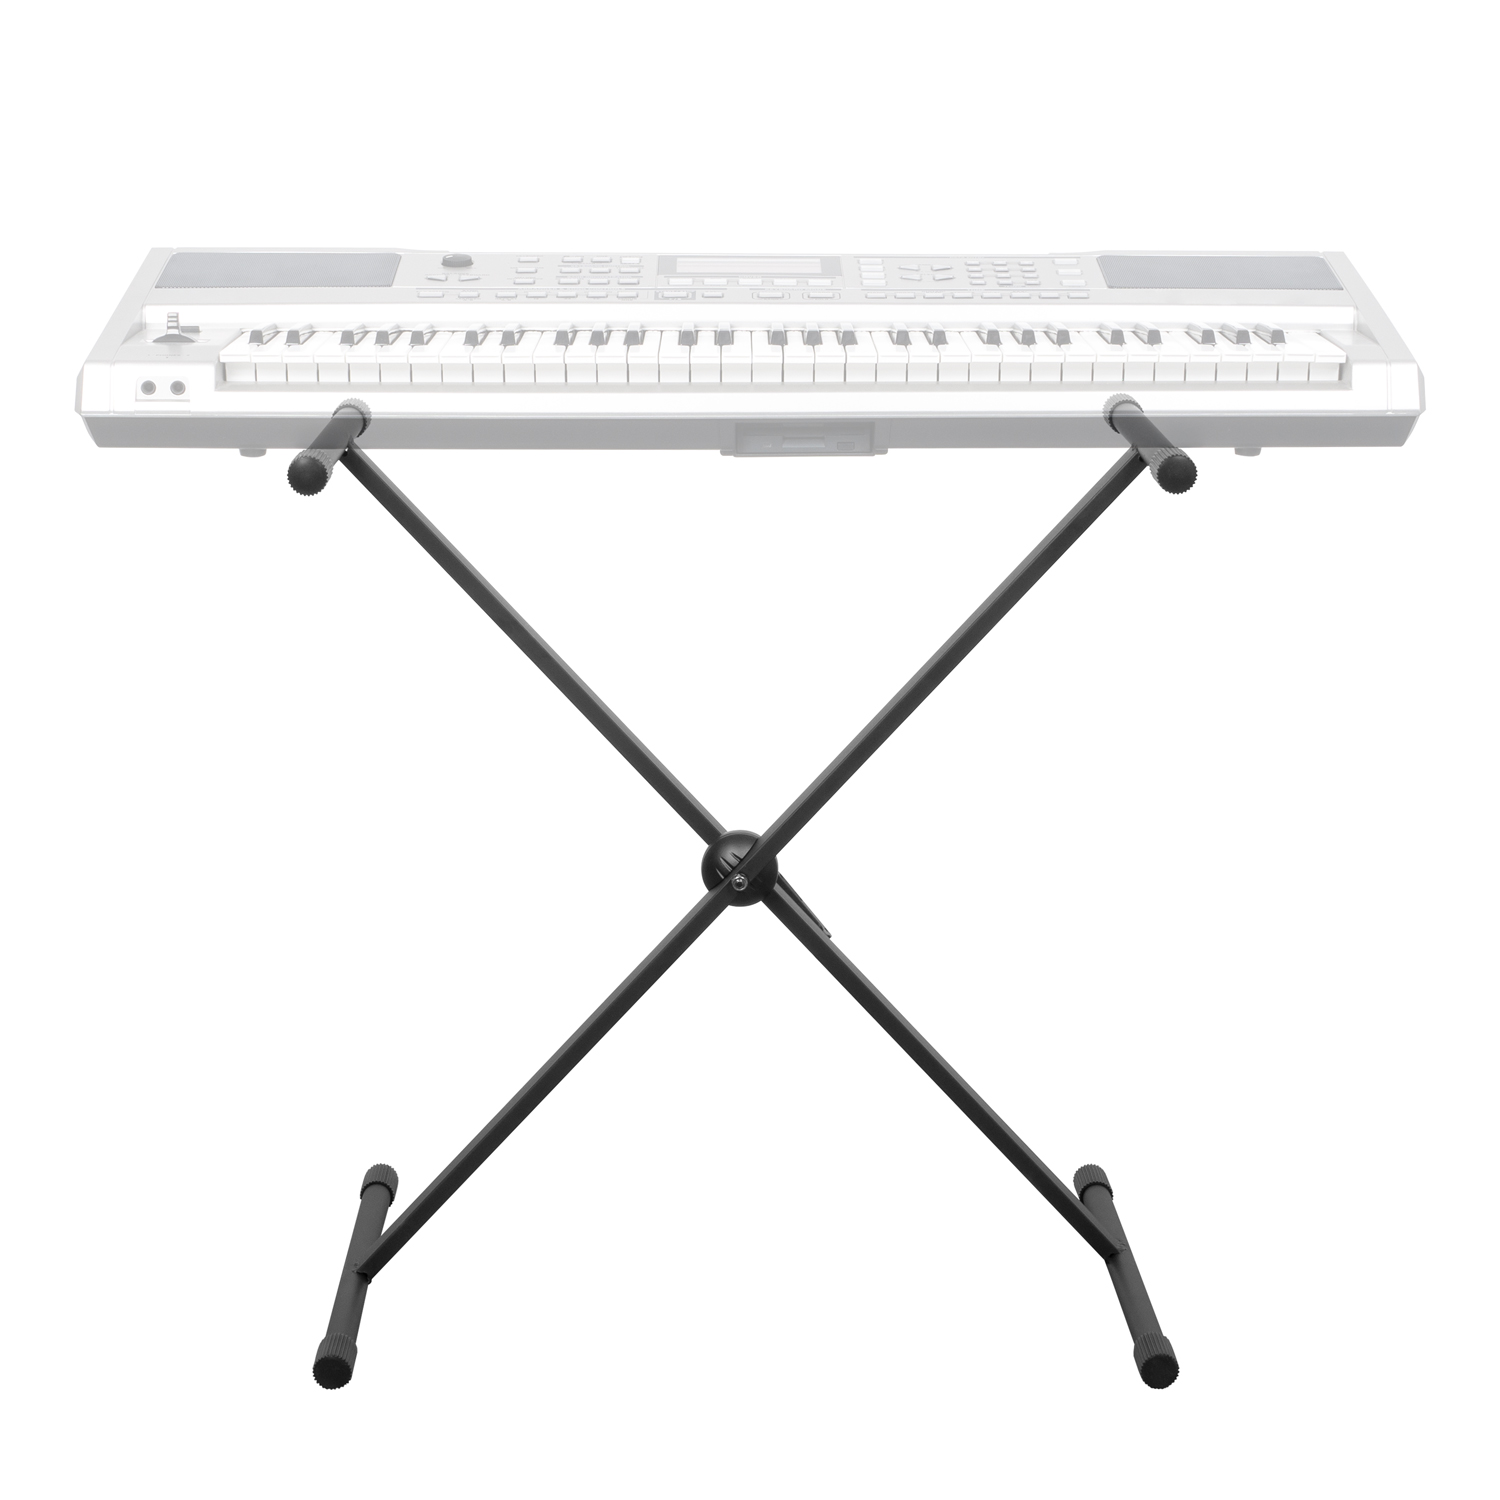  GLEAM Keyboard Stand Single-X-Shaped : Musical Instruments